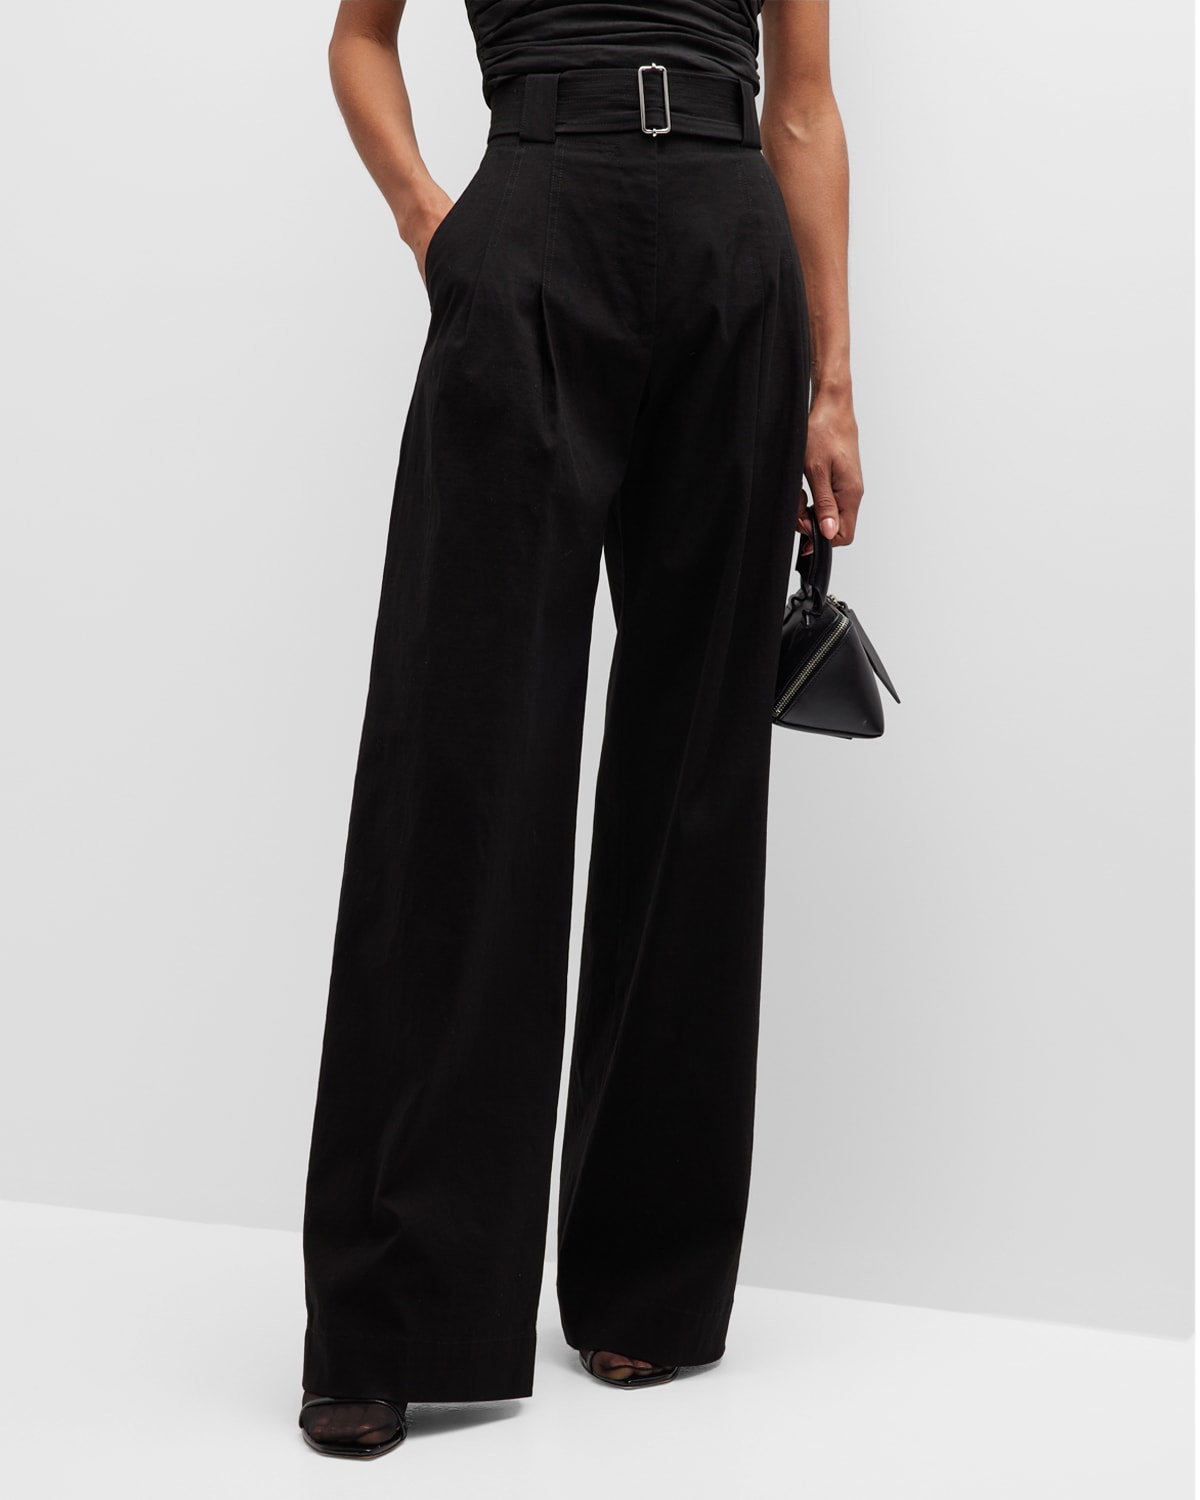 A.L.C DARBY BELTED WIDE-LEG PANTS